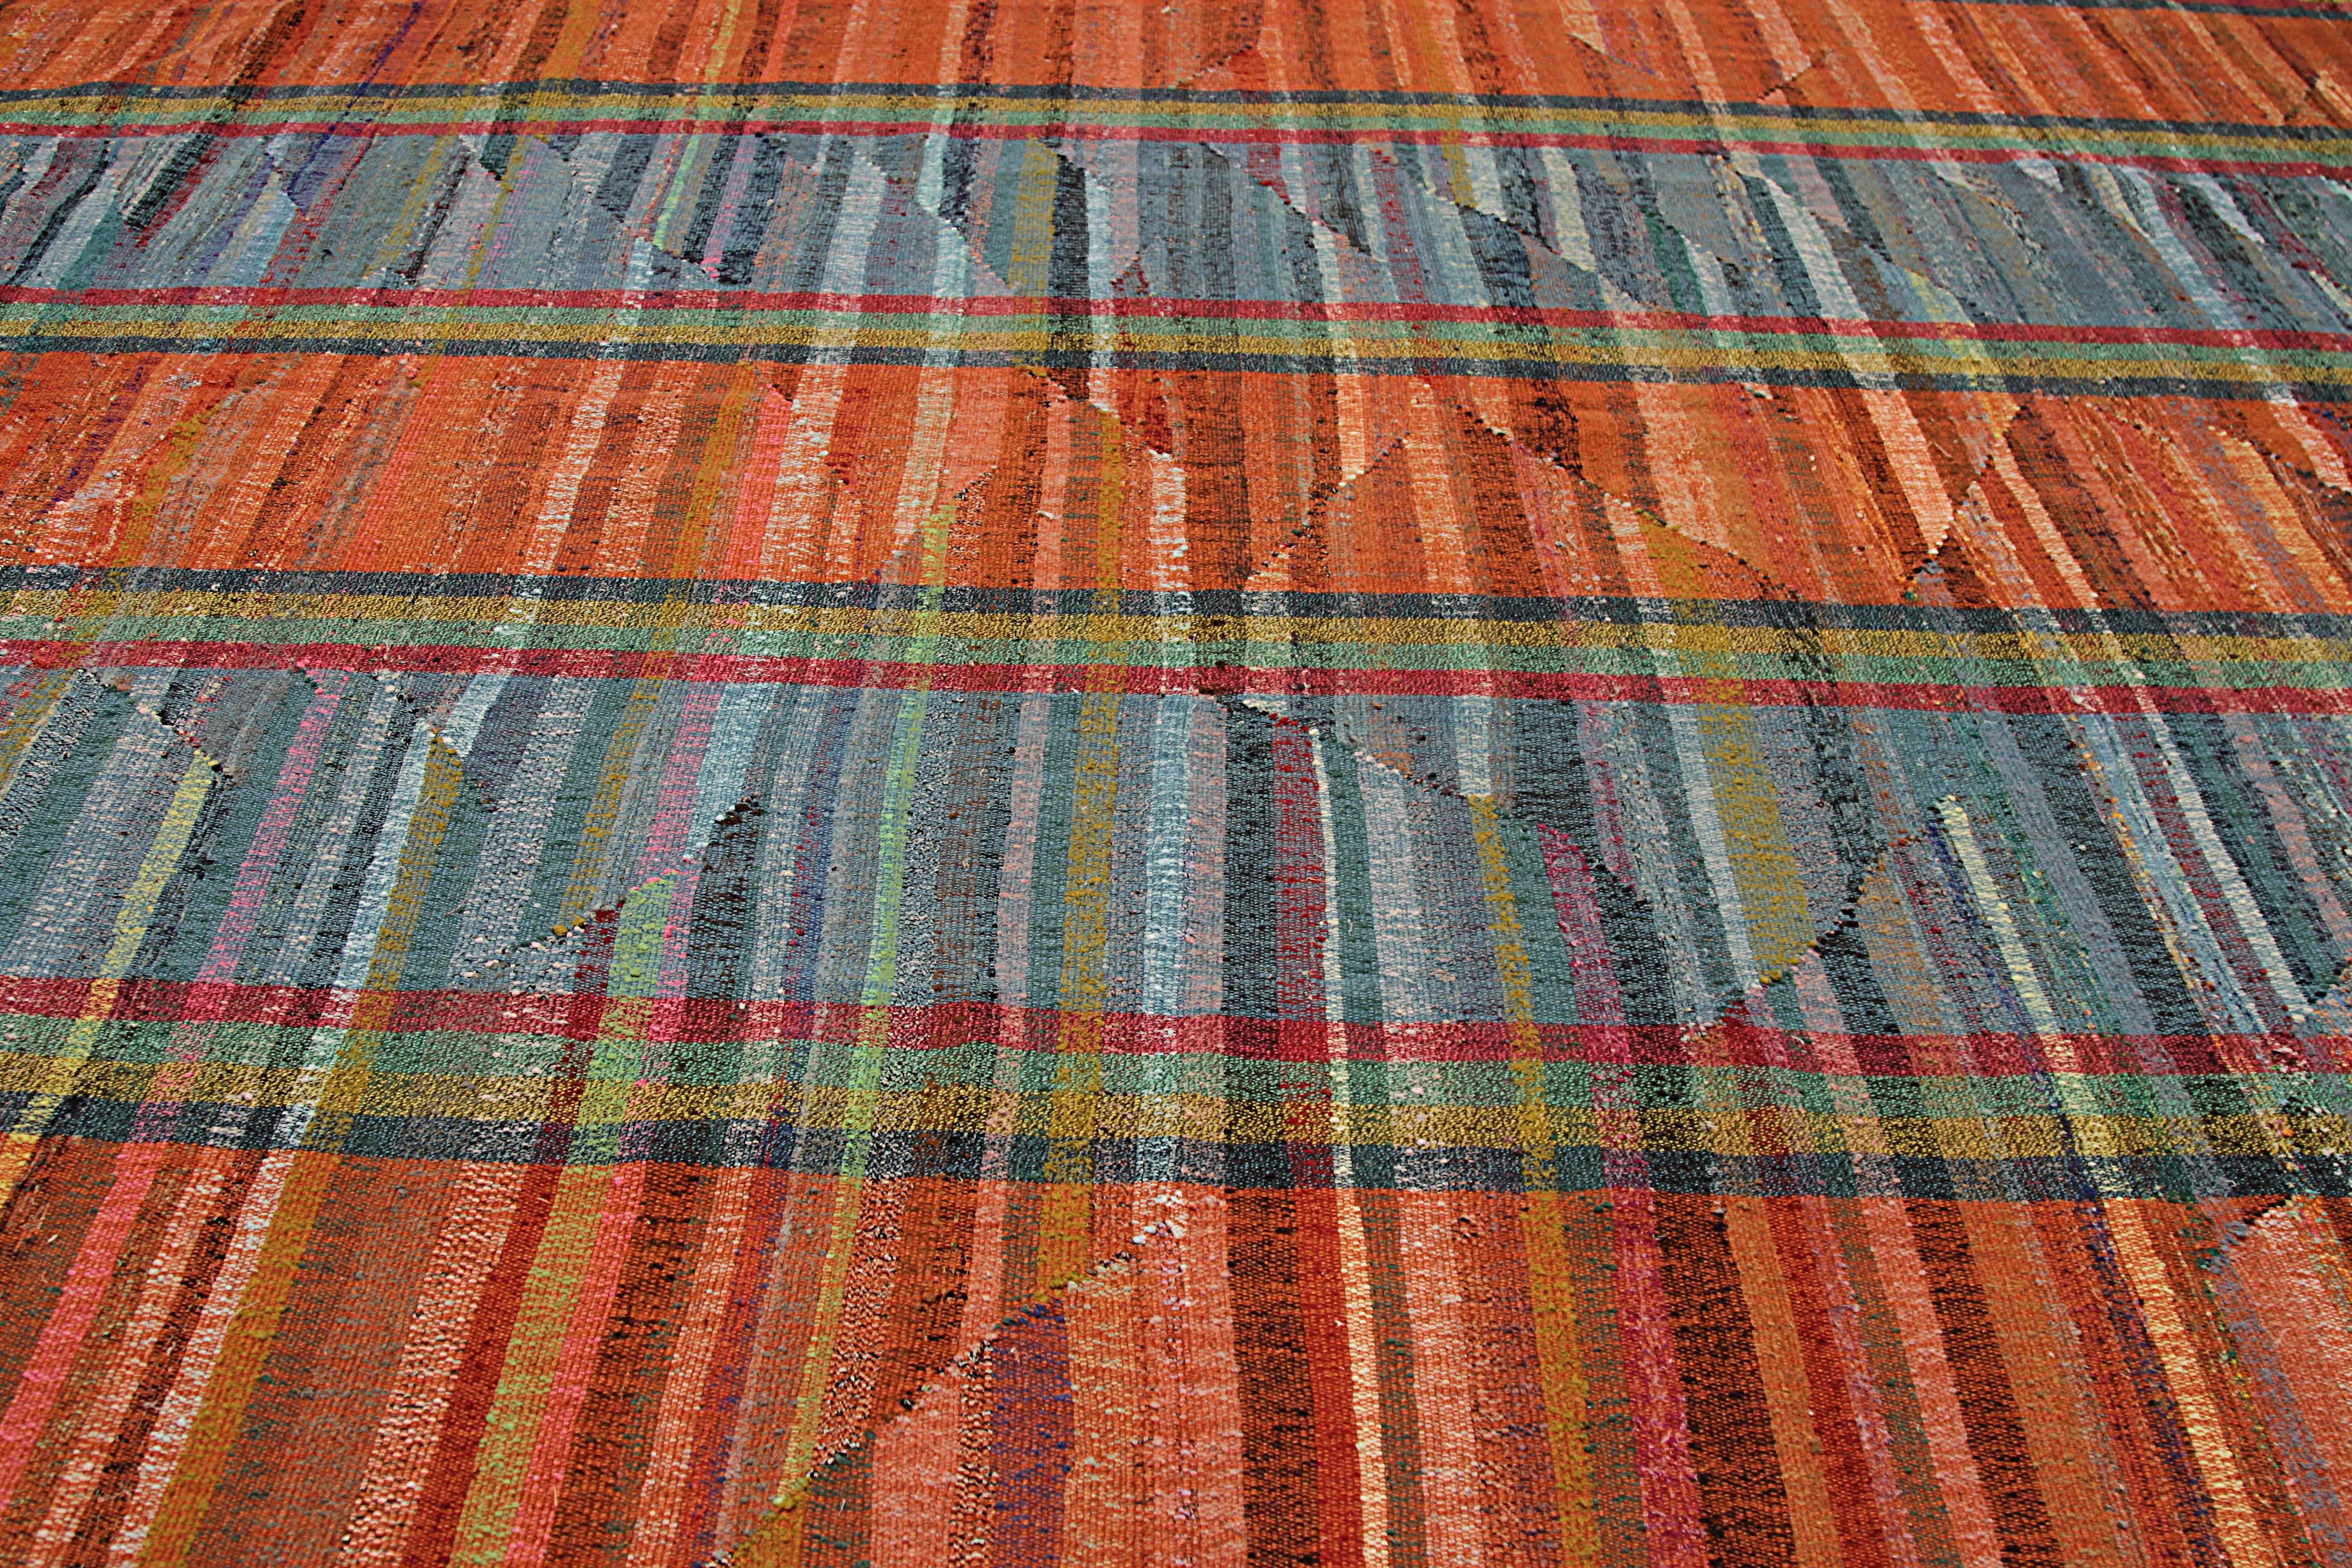 Hand-Woven Modern Turkish Kilim Rug Made of Antique Wool with Colored Stripes For Sale